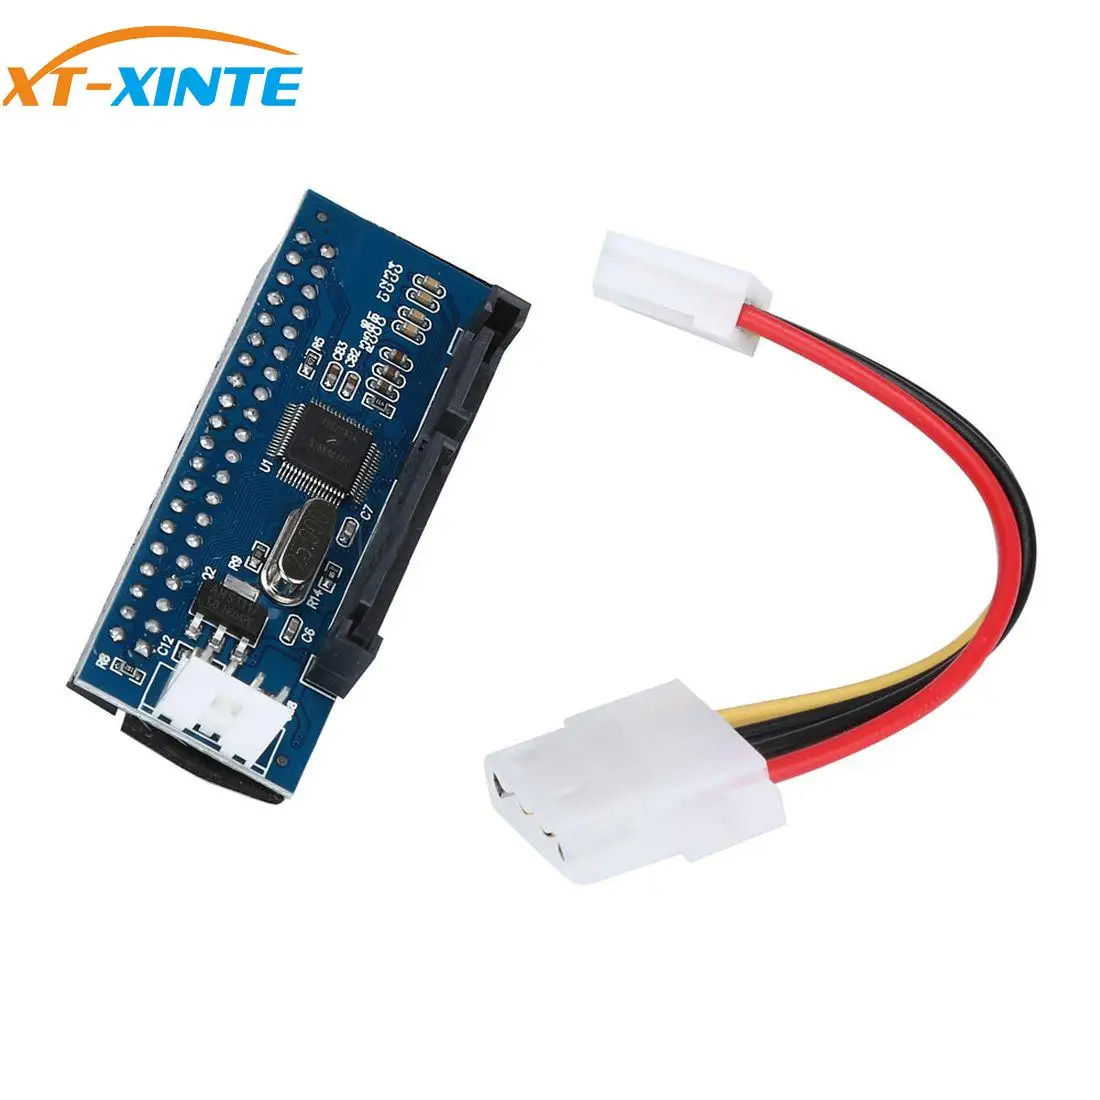 

XT-XINTE39 Pin IDE to SATA Connector SATA IDE Adapter 3.5 HDD IDE/PATA Hard Disk Adapter Converter Card with Data Power Cable